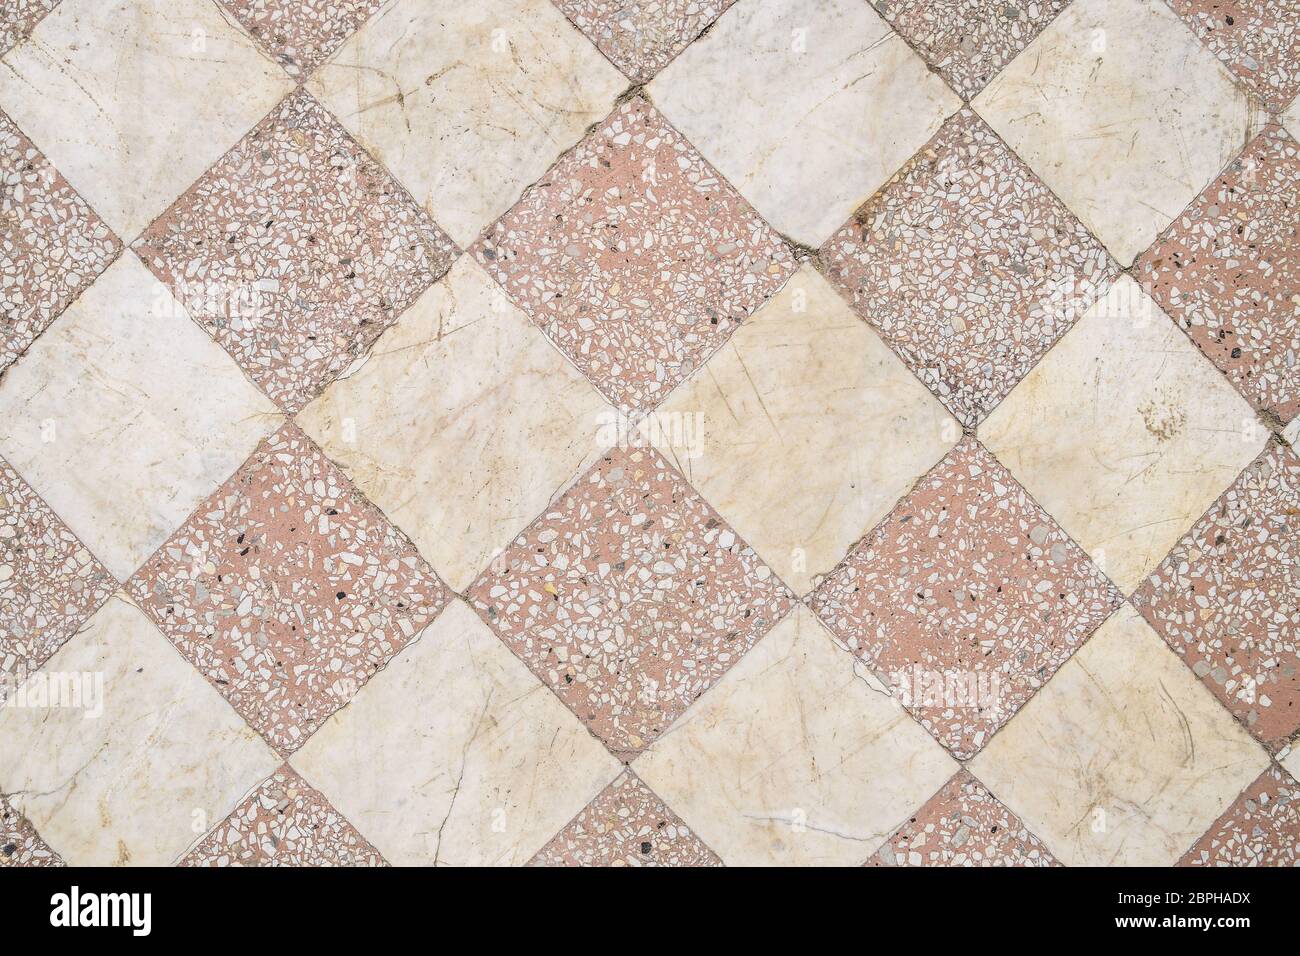 Background texture of tiled flooring. Building materials for the floor. Stock Photo